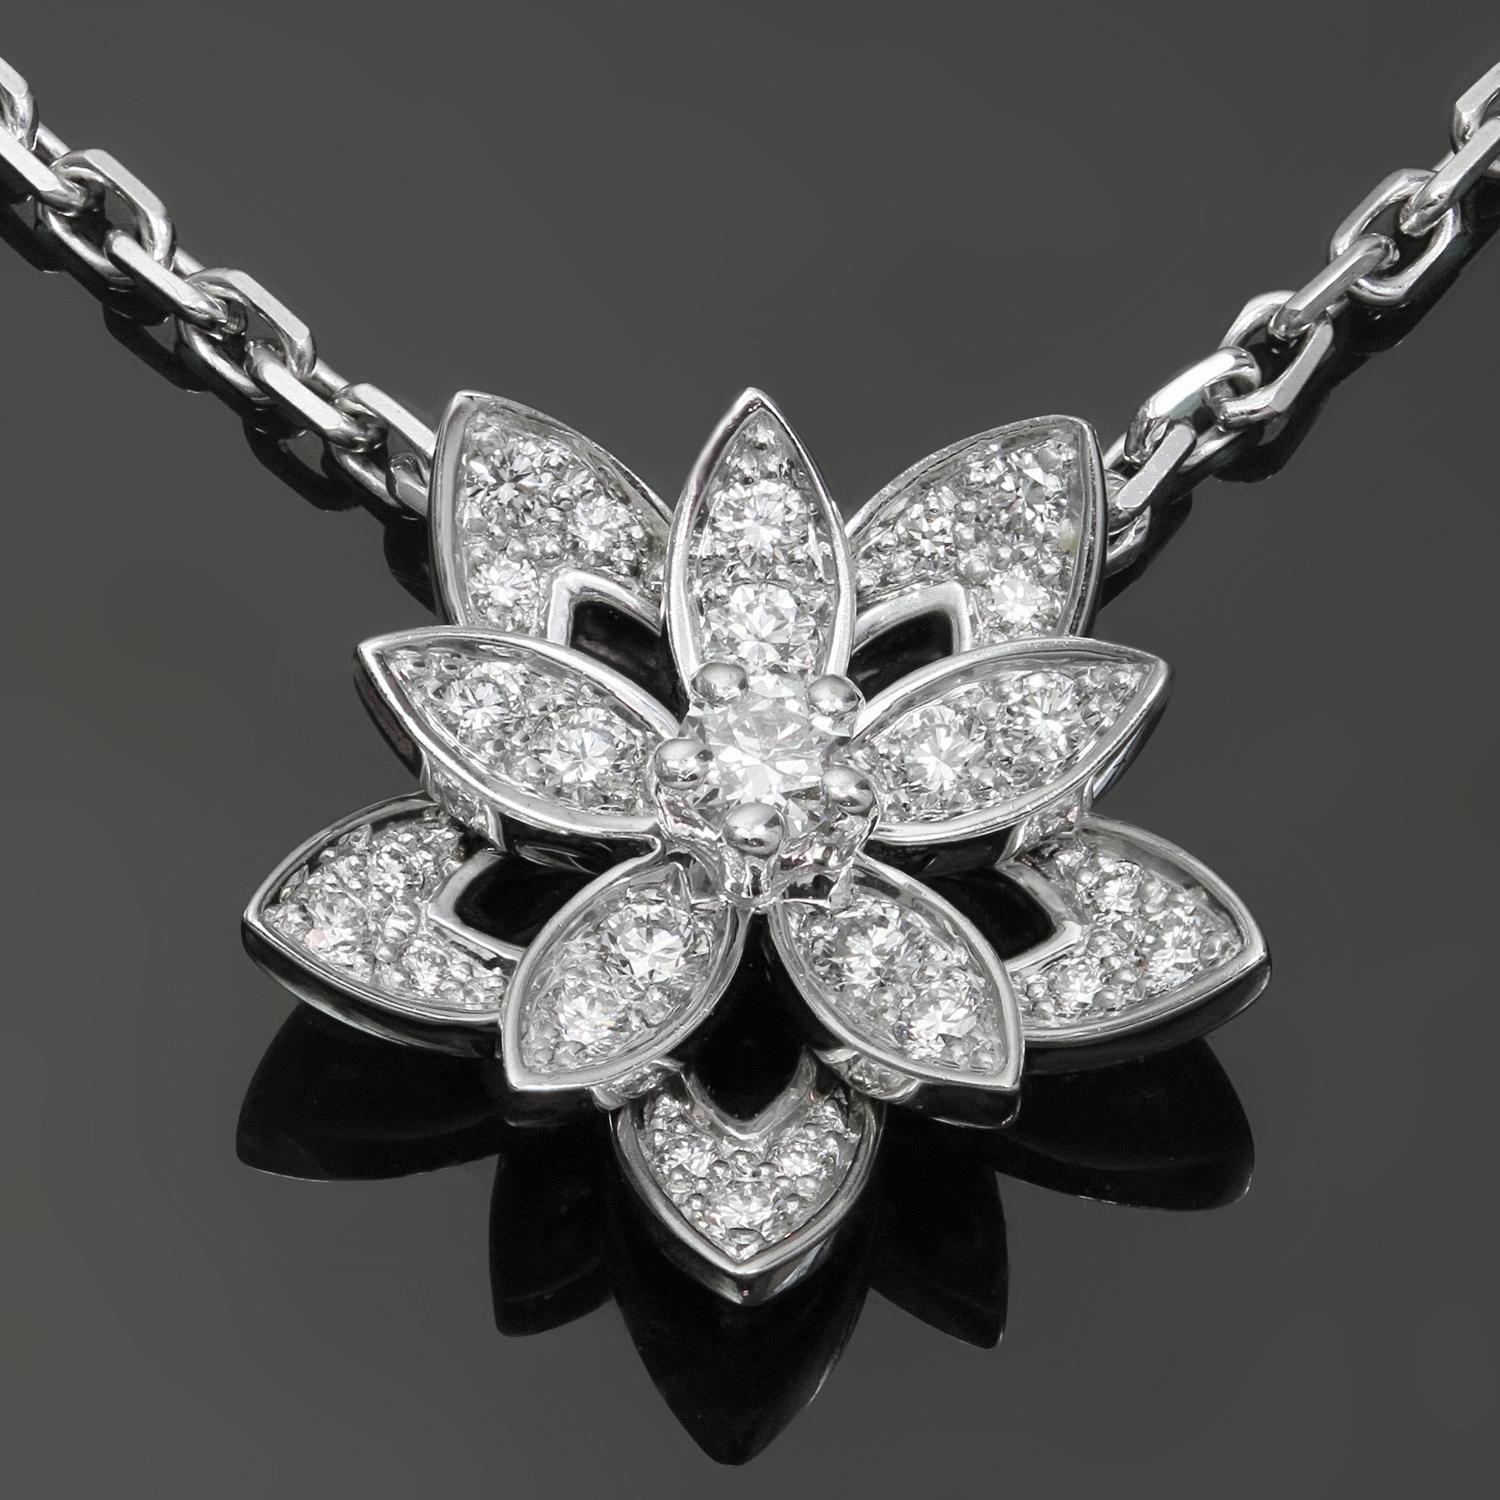 This gorgeous Van Cleef & Arpels necklace is crafted in 18k white gold and features an openwork lotus pendant set with 26 round brilliant D-F VVS1-VVS2 diamonds weighing an estimated 0.16 carats. This is the mini model of the pendant. Made in France